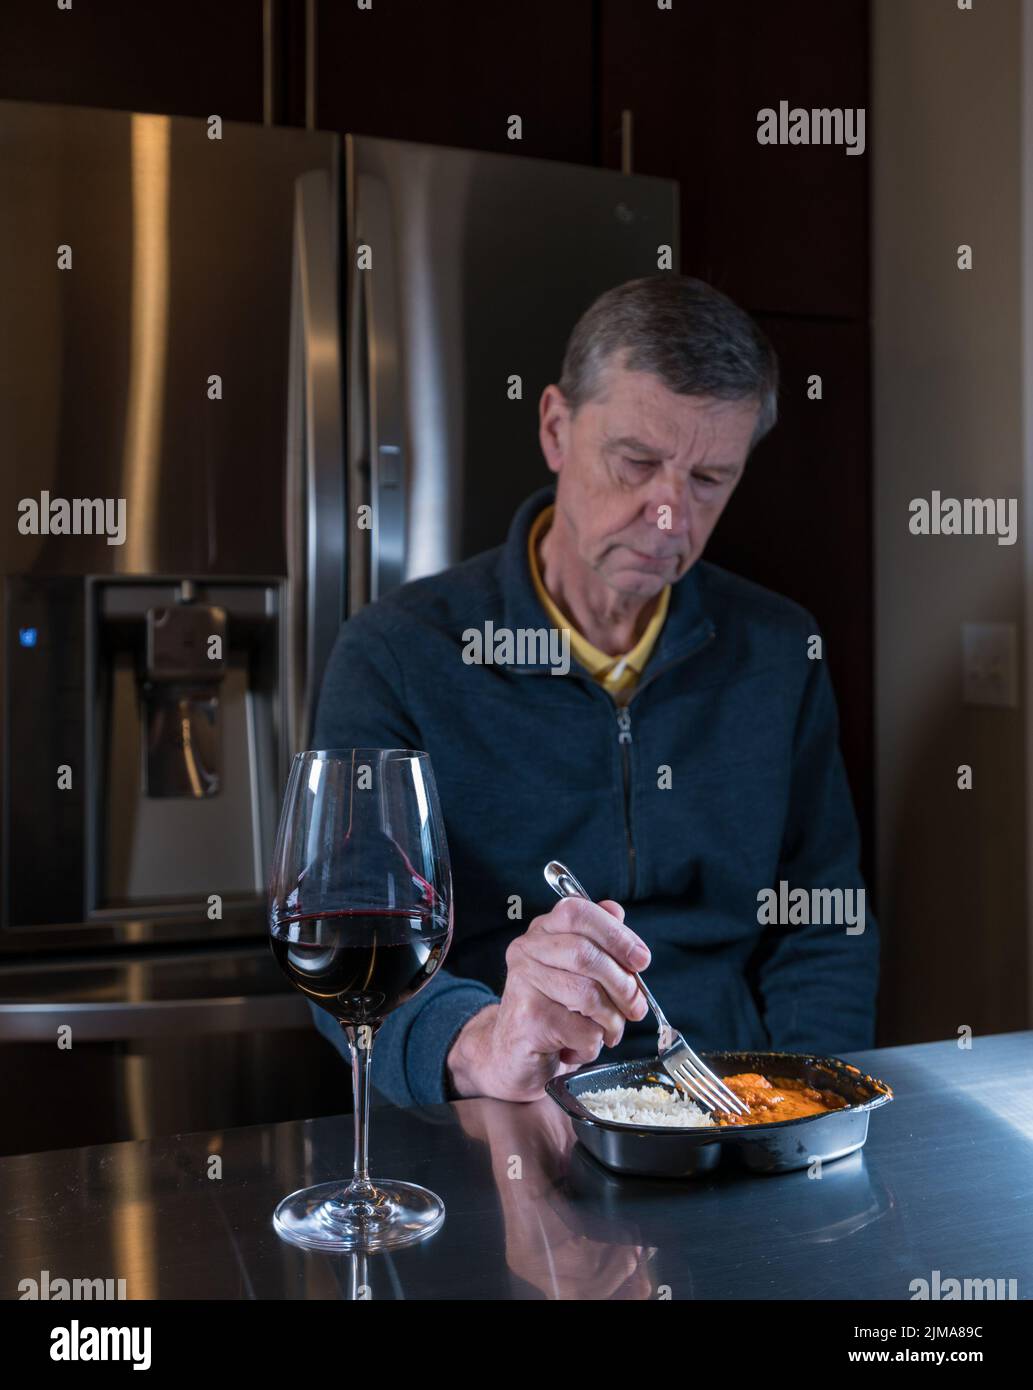 Lonely senior man eating ready meal at table Stock Photo